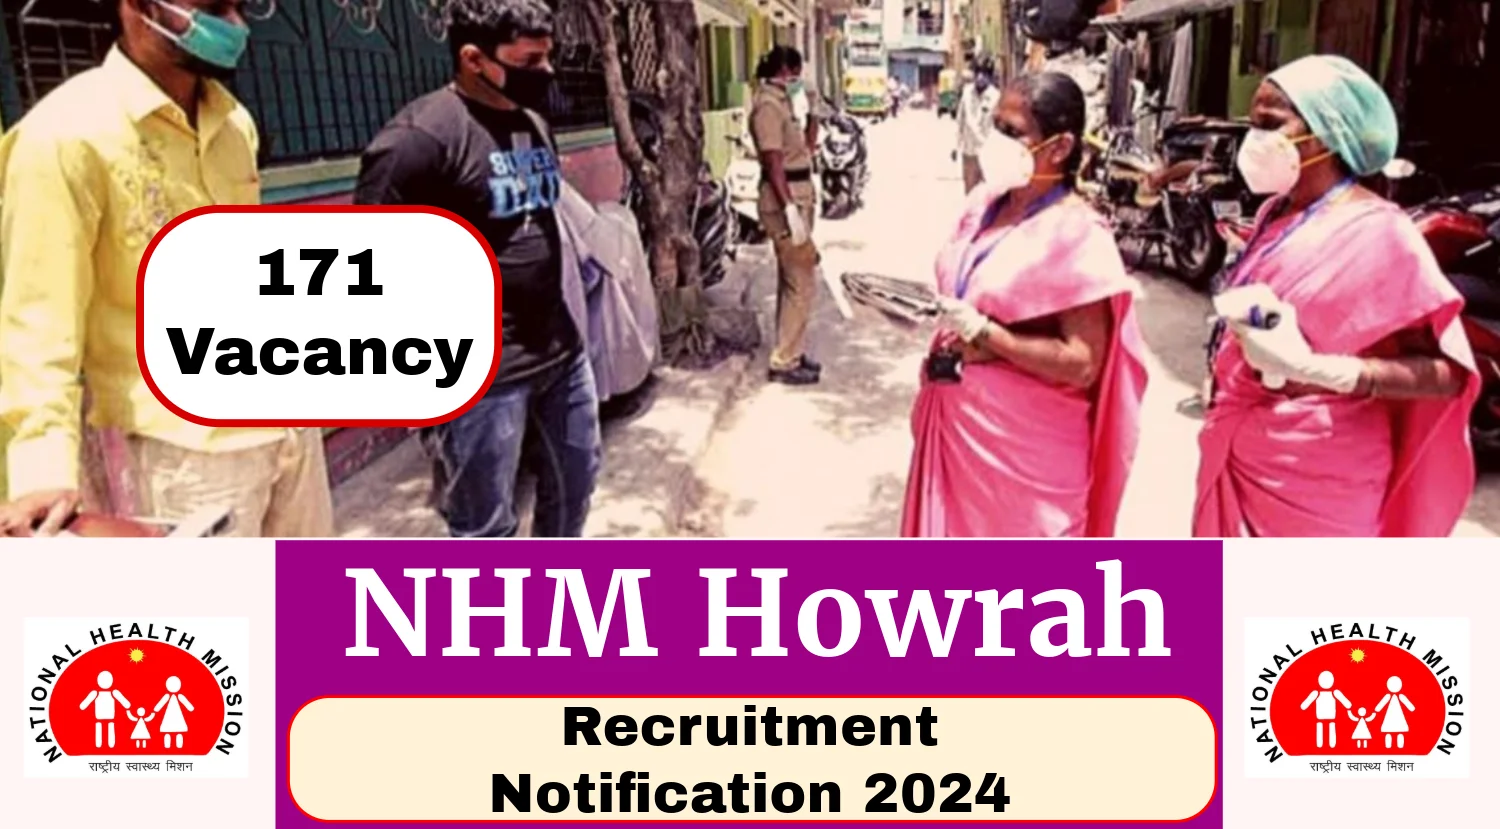 DHFWS Howrah Recruitment 2024 Notification Out for 171 Posts